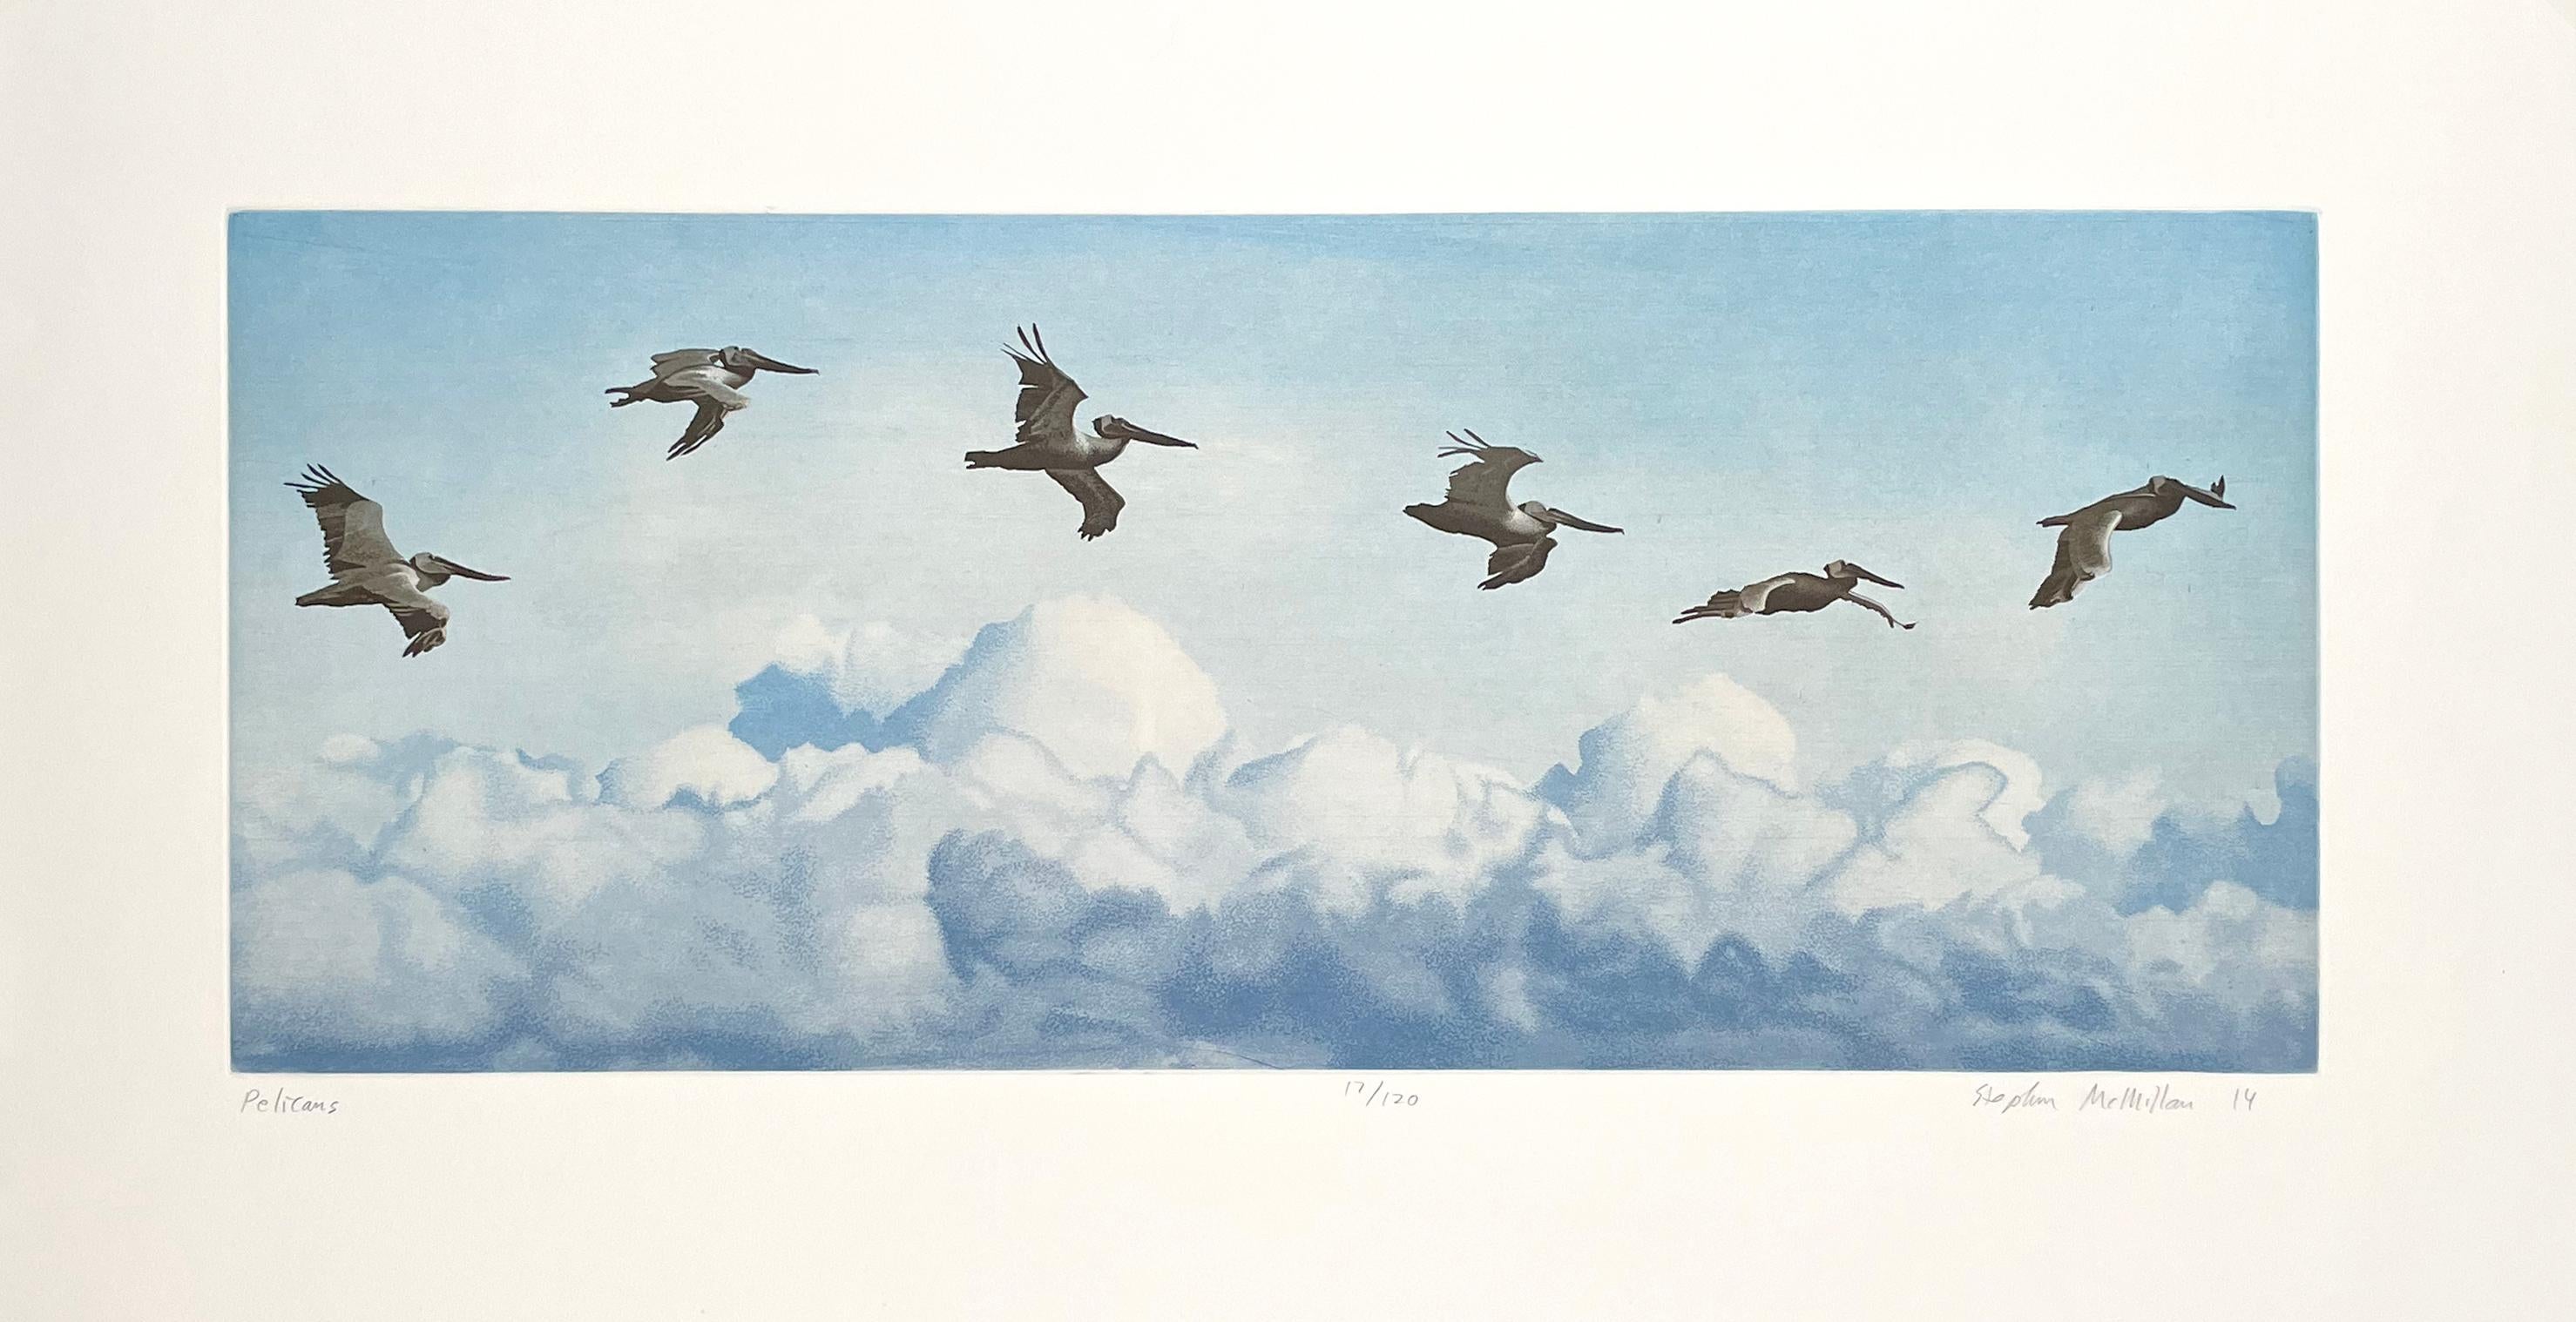 The wildlife and scenery of the Pacific Northwest is the constant focus for McMillan, who spends a lot of his time backpacking and hiking to find the inspiration for his prints like this one of Pelicans in flight.

Born in Berkeley, California, on